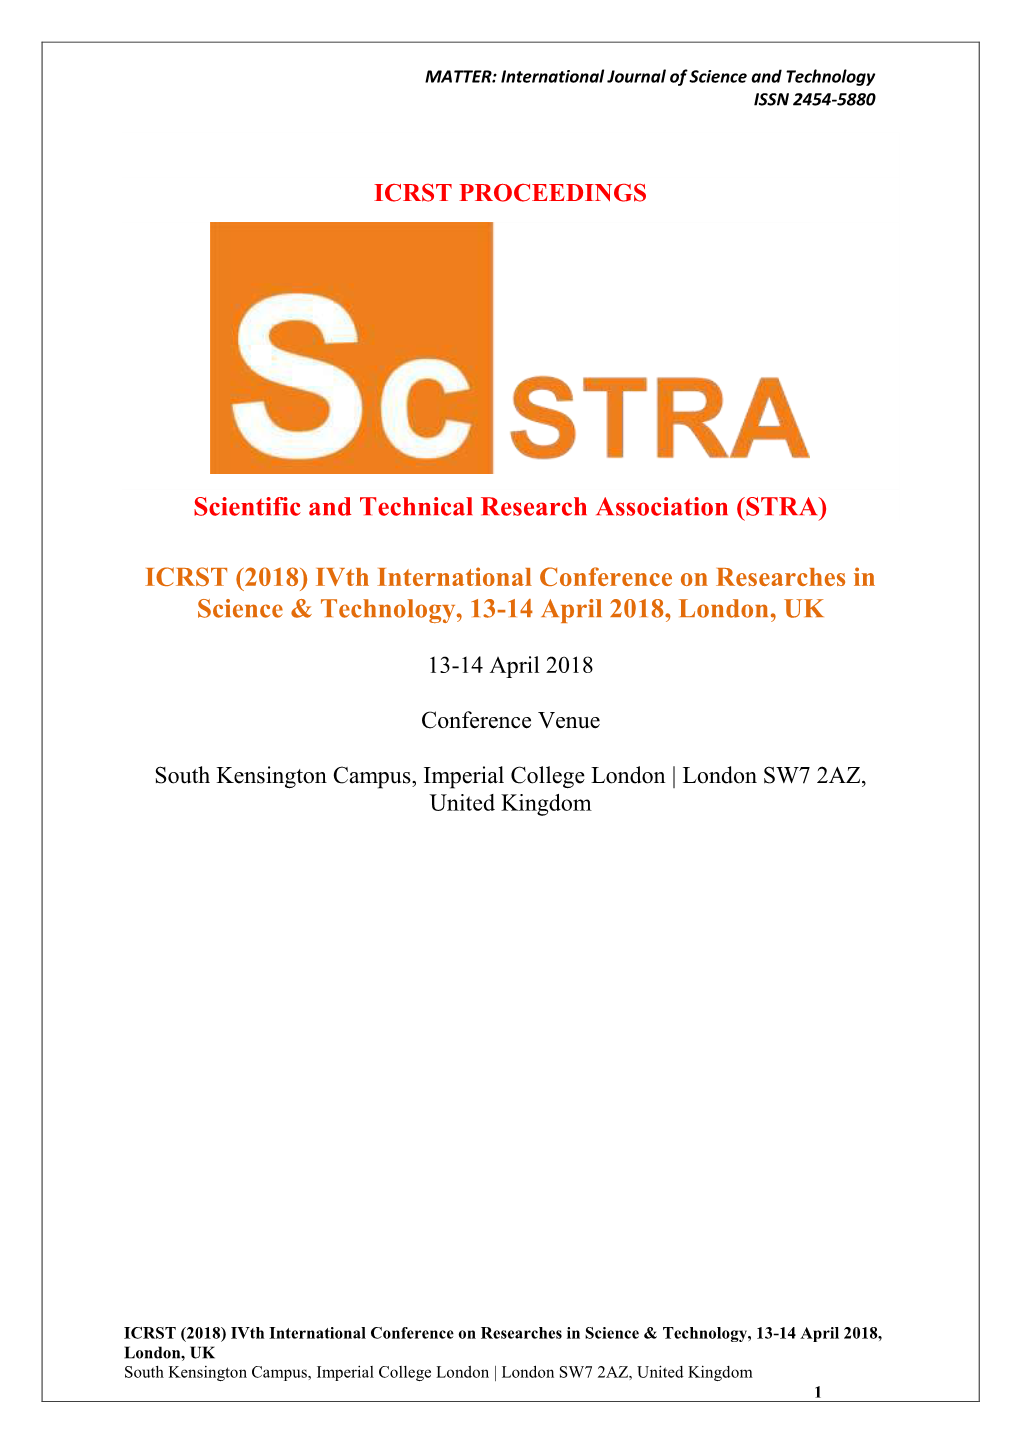 Scientific and Technical Research Association (STRA) ICRST (2018